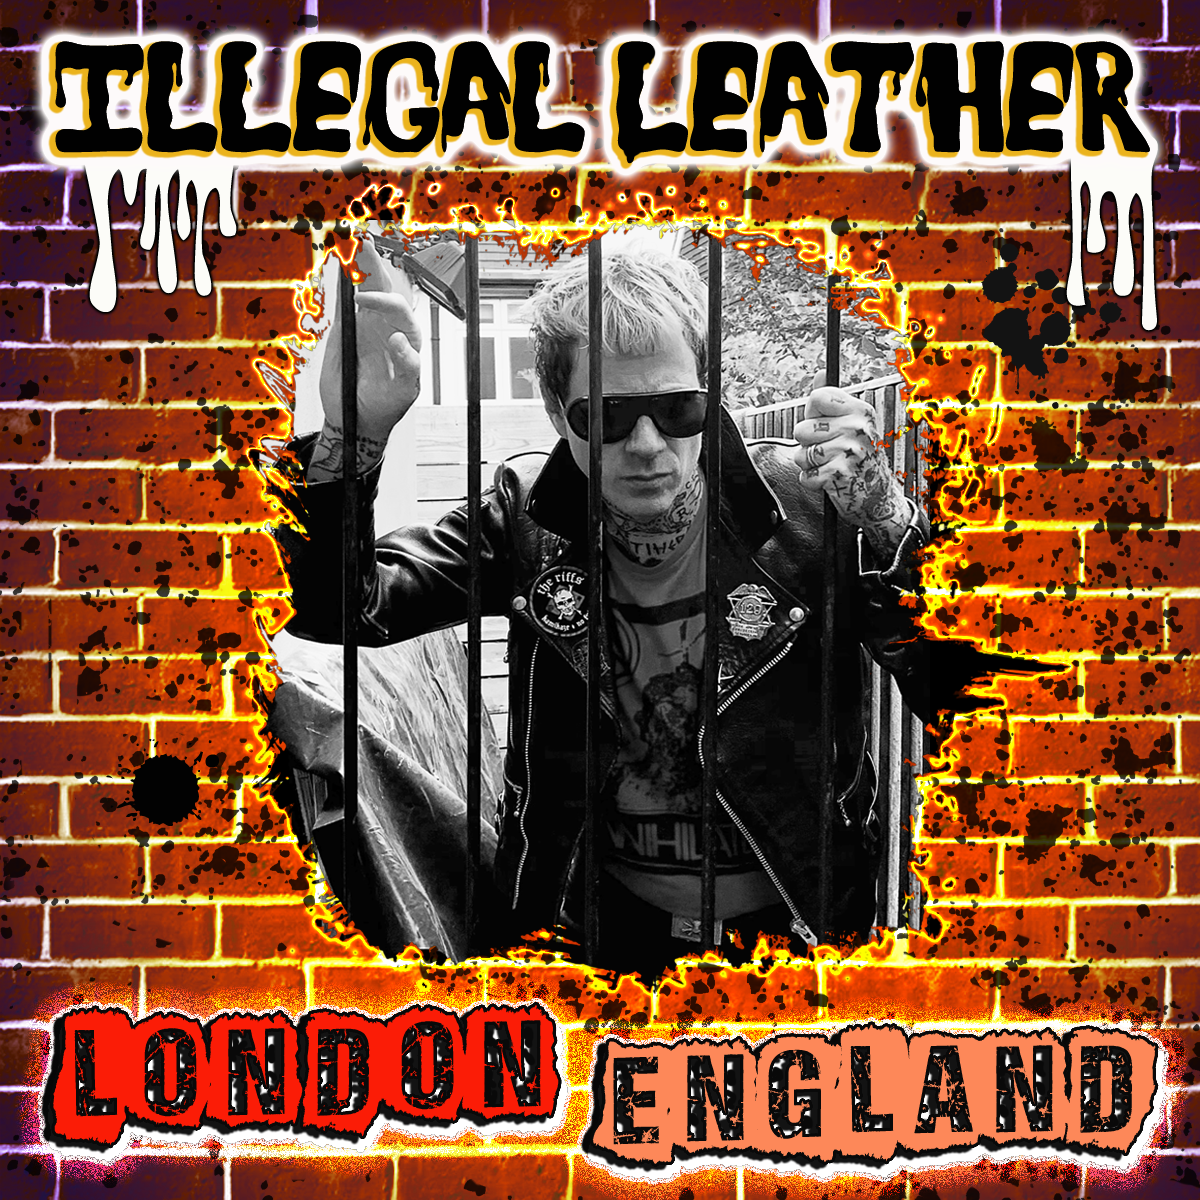 Illegal Leather- Raw Meat LP ~SPLIT SPLAT COLORED VINYL SPECIAL EDITION LIMITED TO 100!